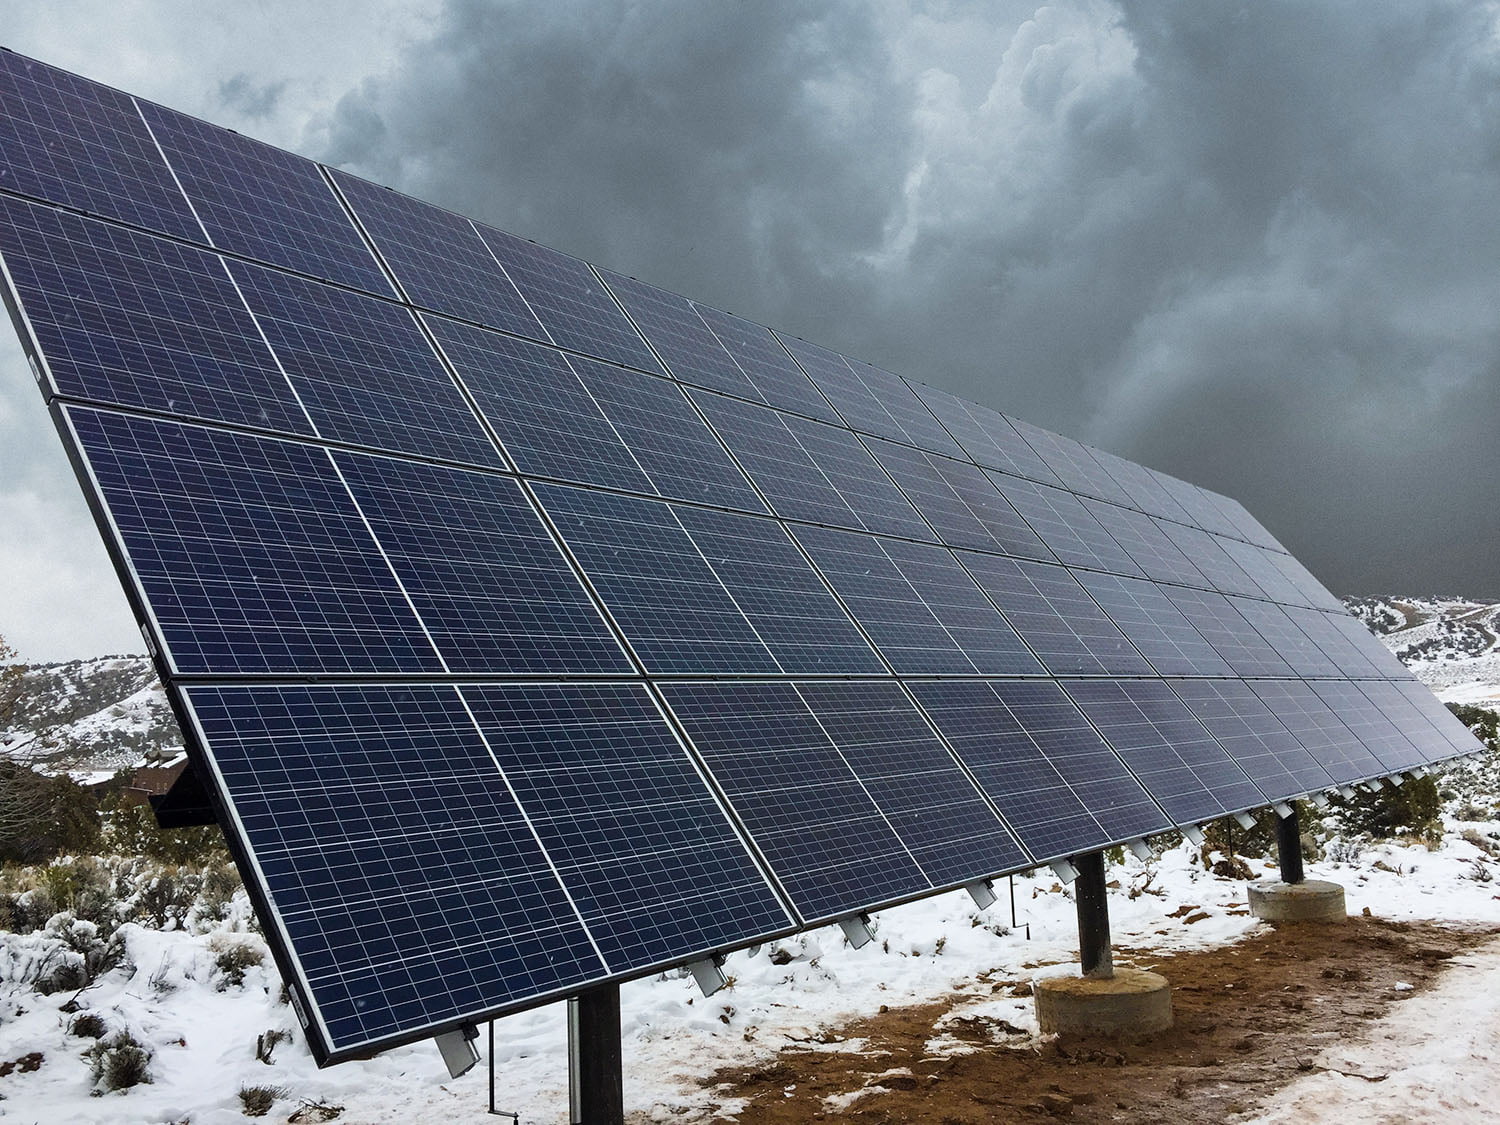 Ground mount solar panels during winter storm